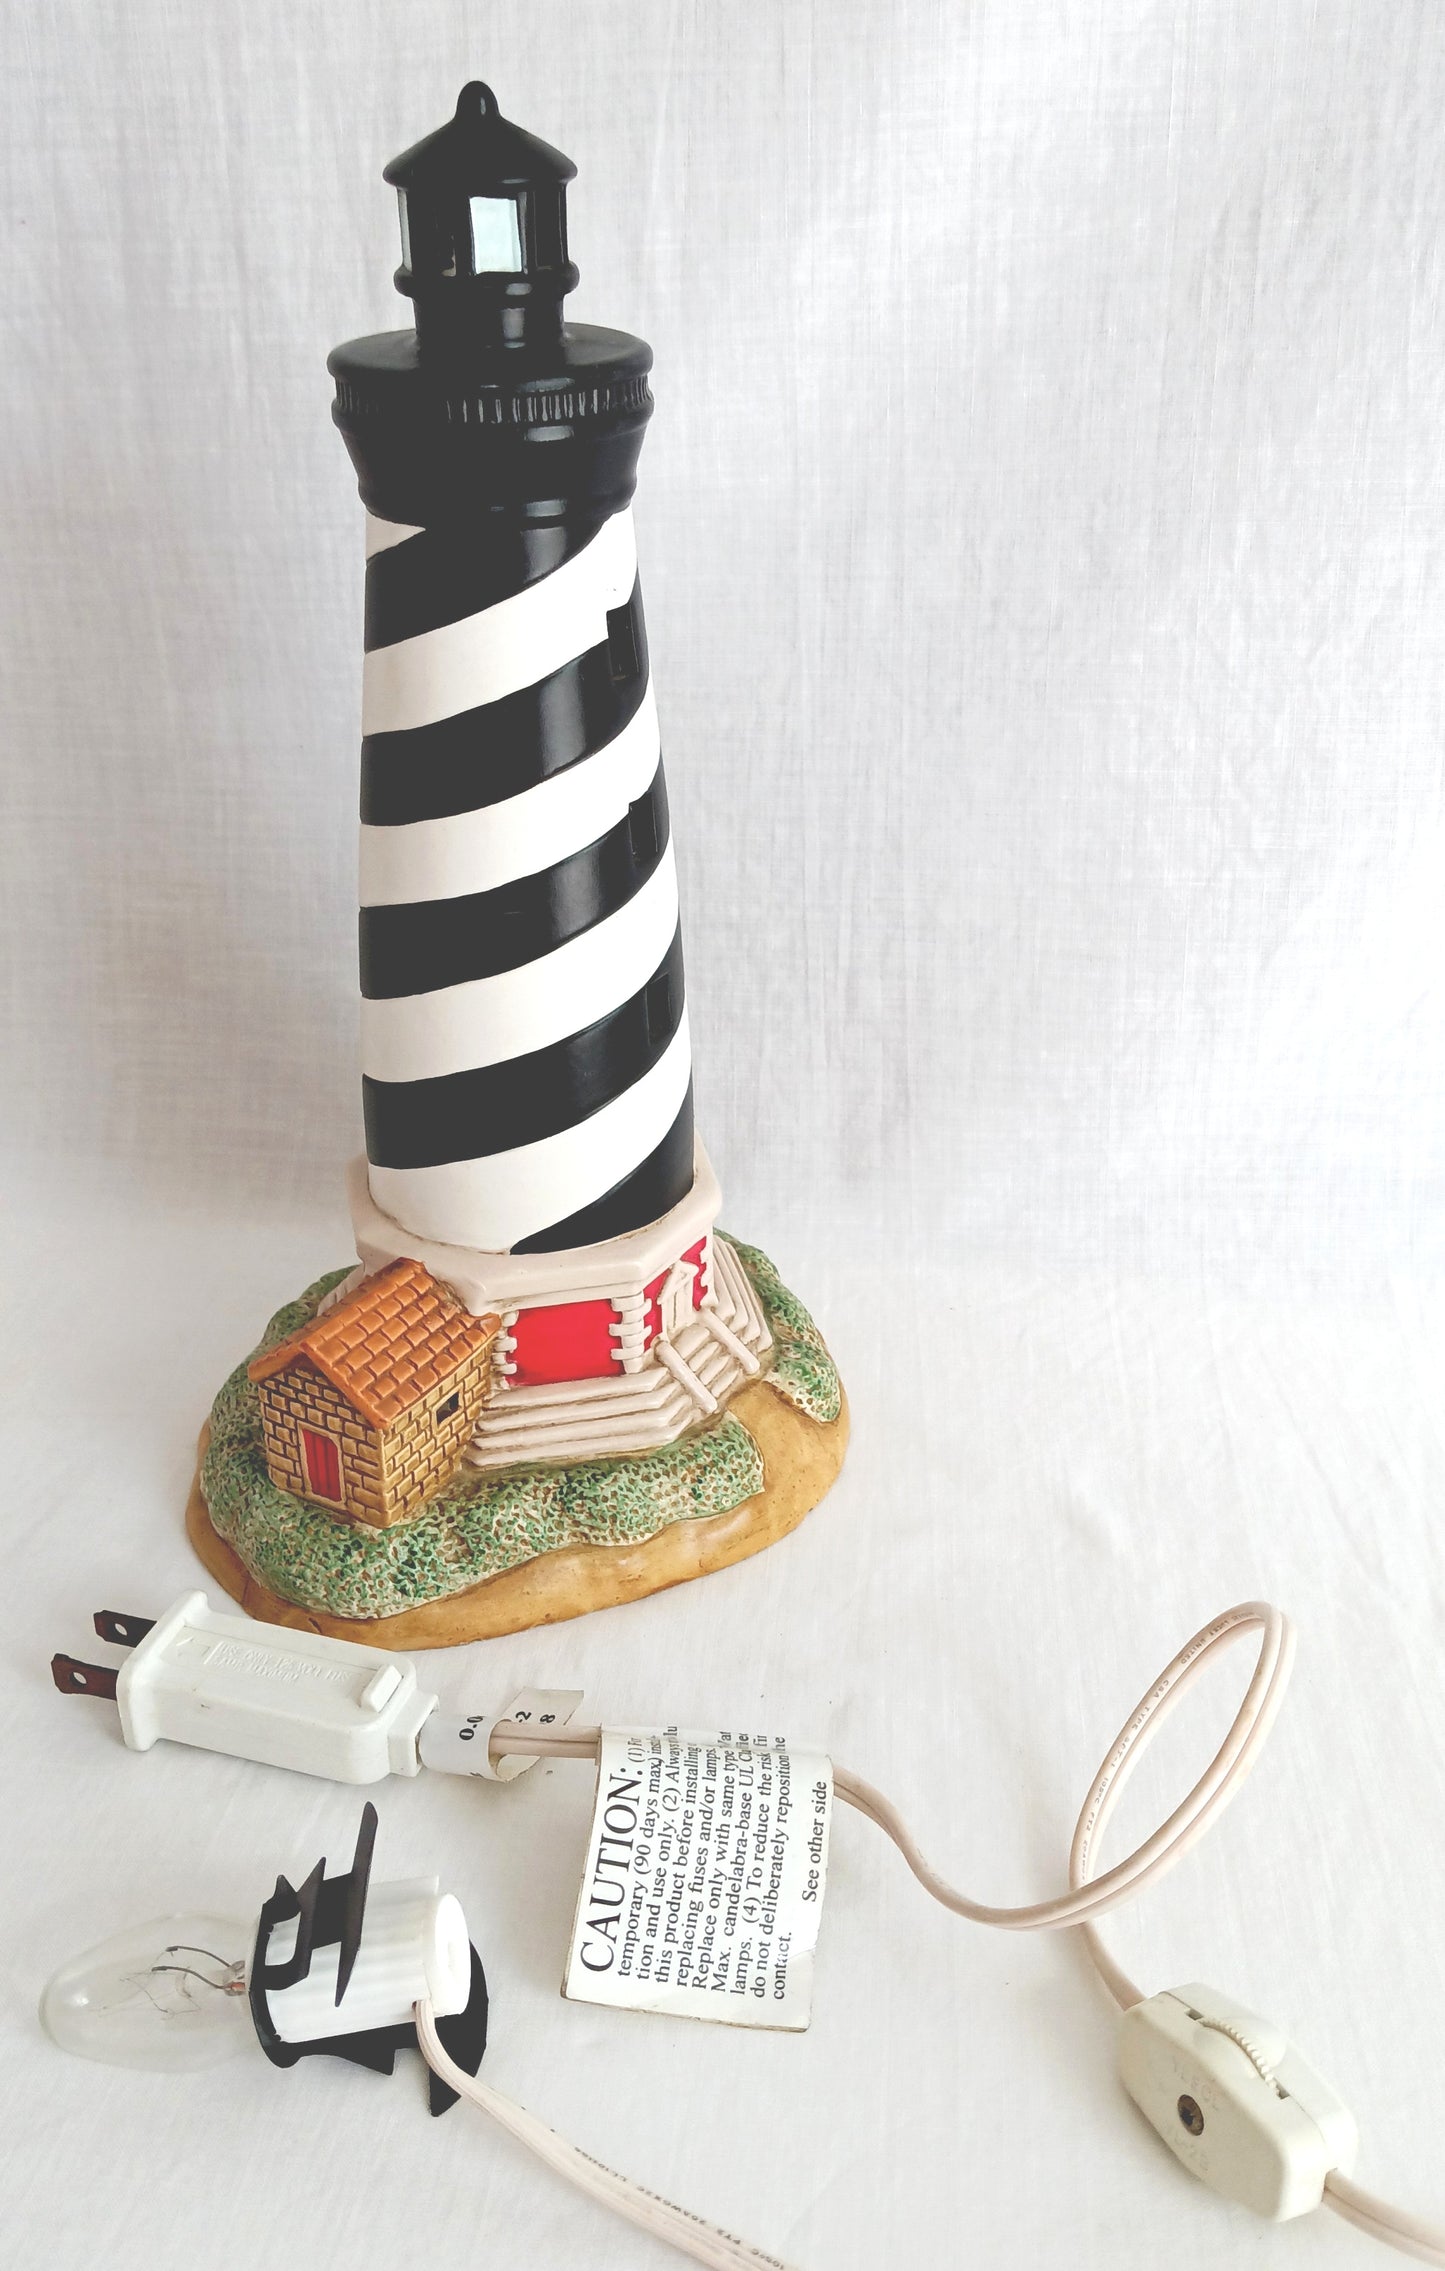 Vintage Lefton 1991 Portable Lighthouse Lamp Hand Painted Ceramic In Line Switch Historic American Replica Cape Hatteras Light 1870 #00133